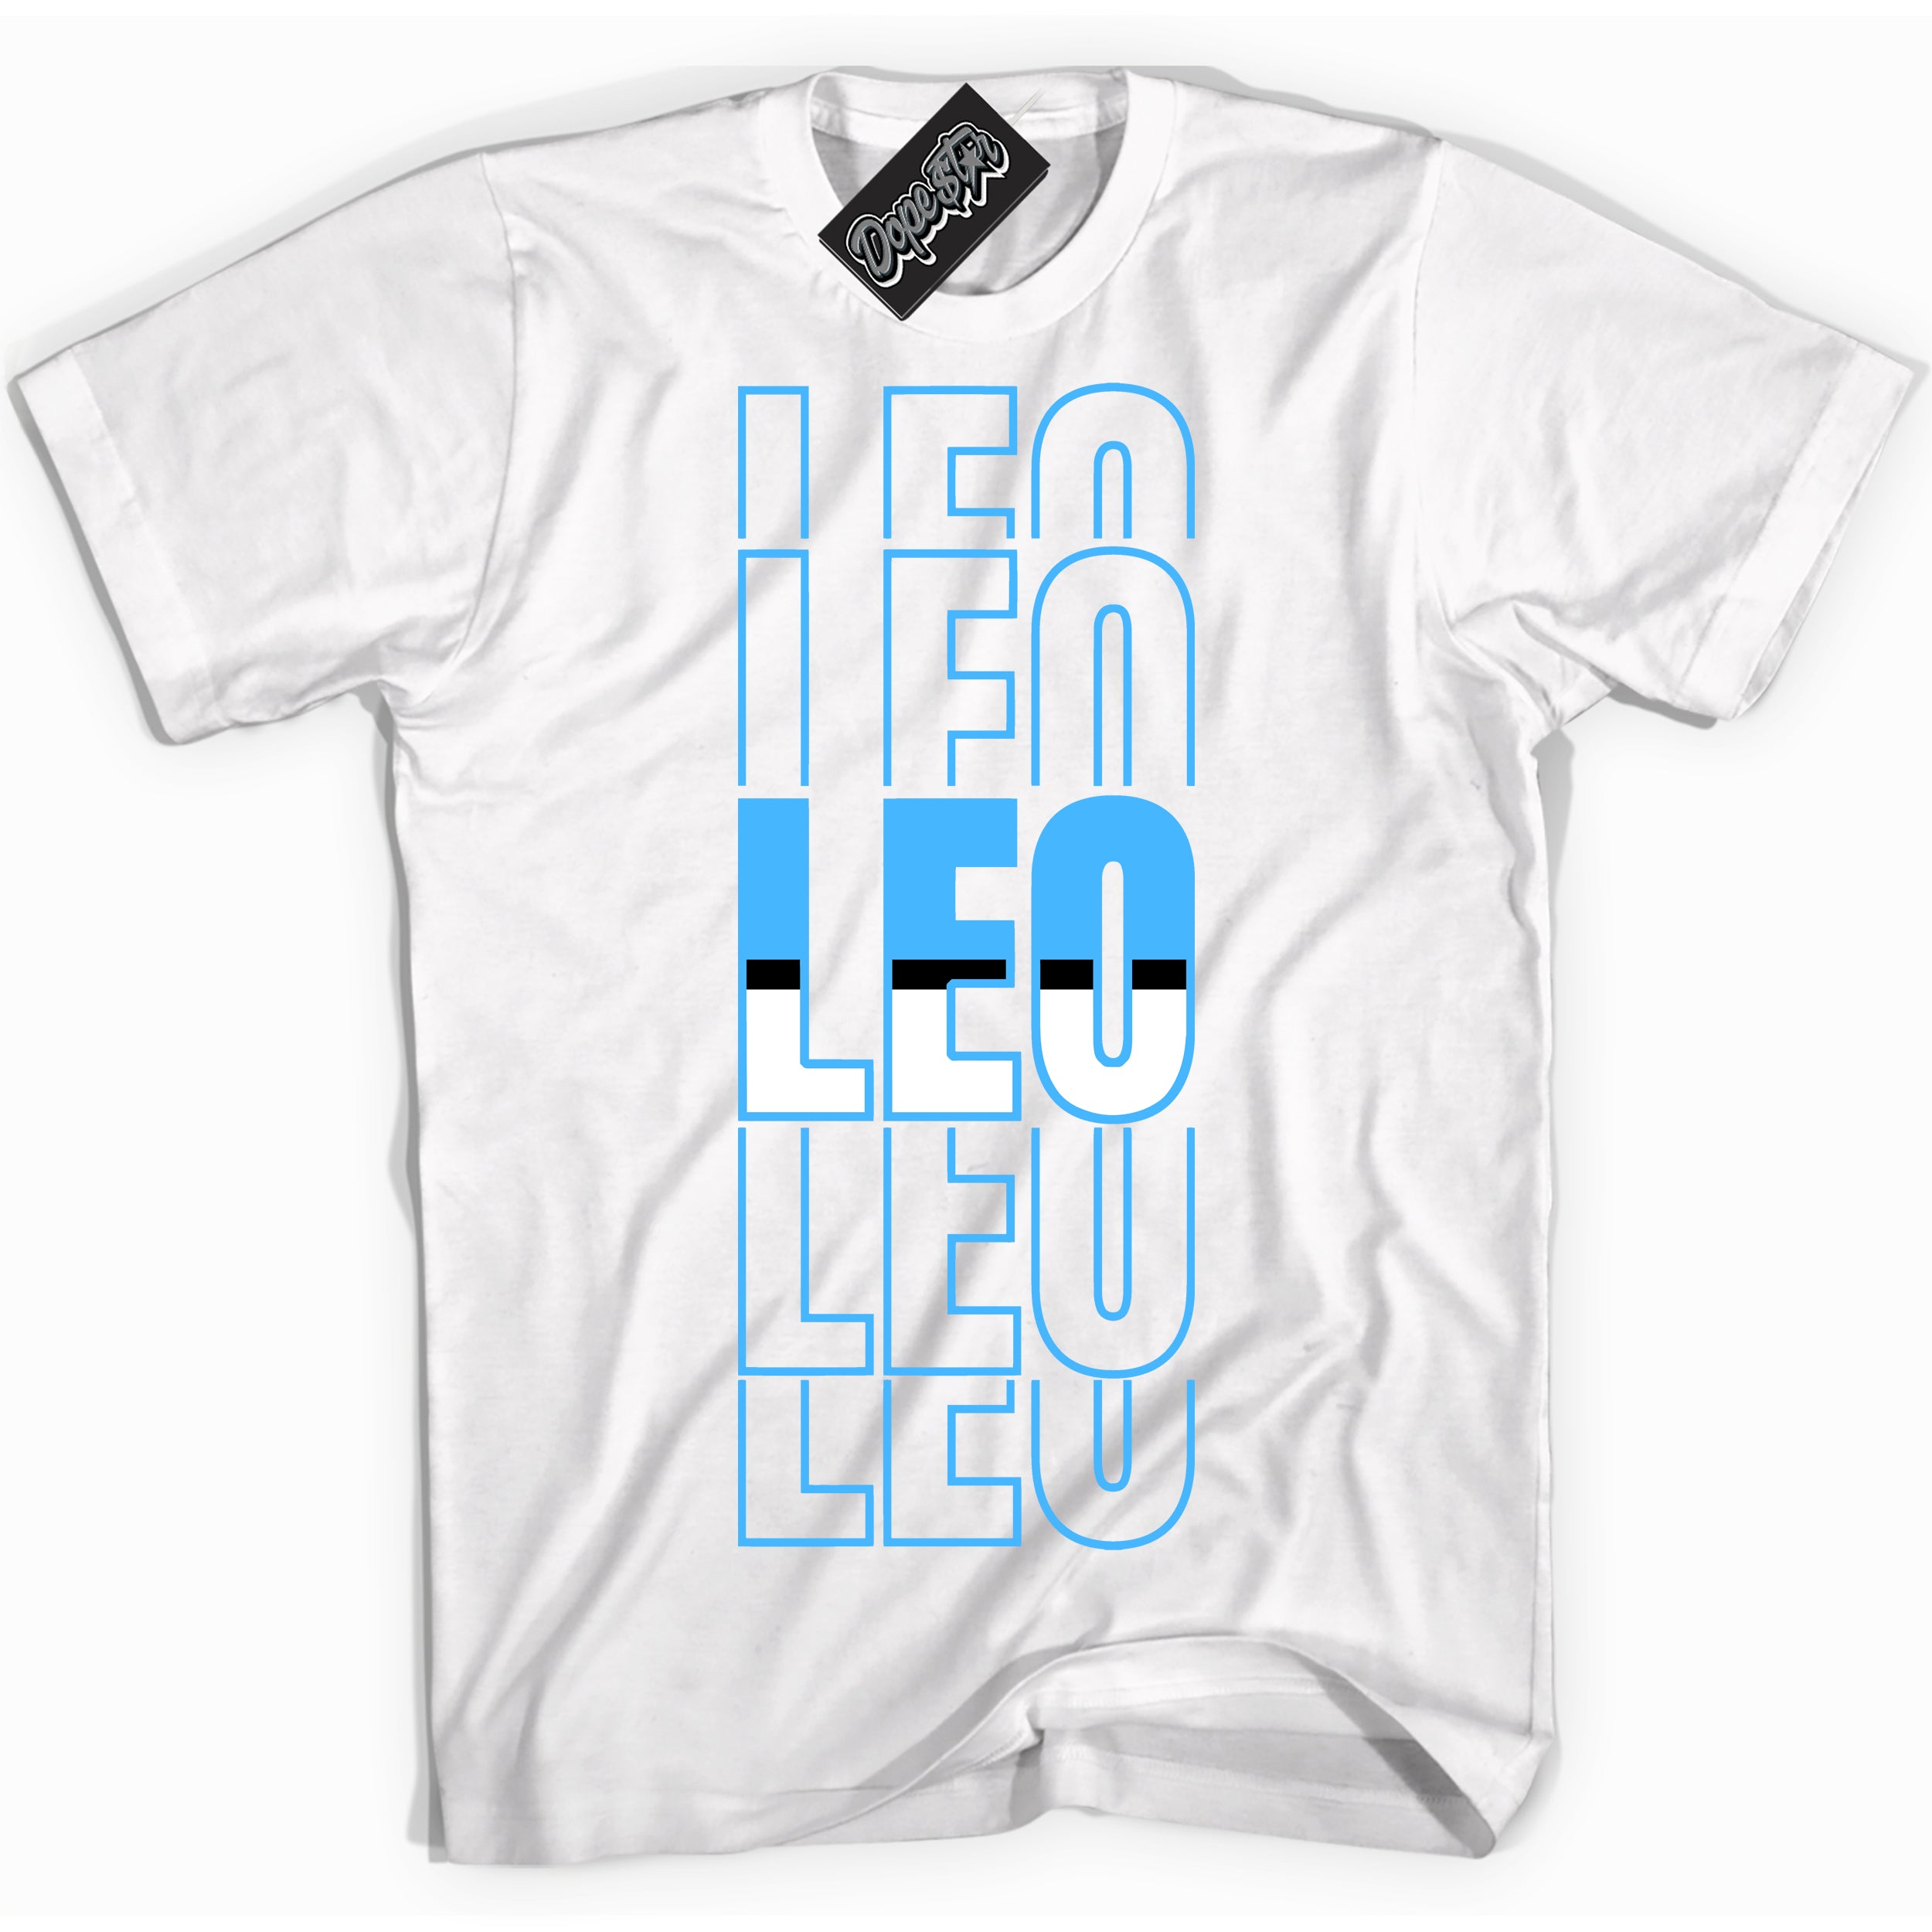 Cool White graphic tee with “ Leo ” design, that perfectly matches Powder Blue 9s sneakers 